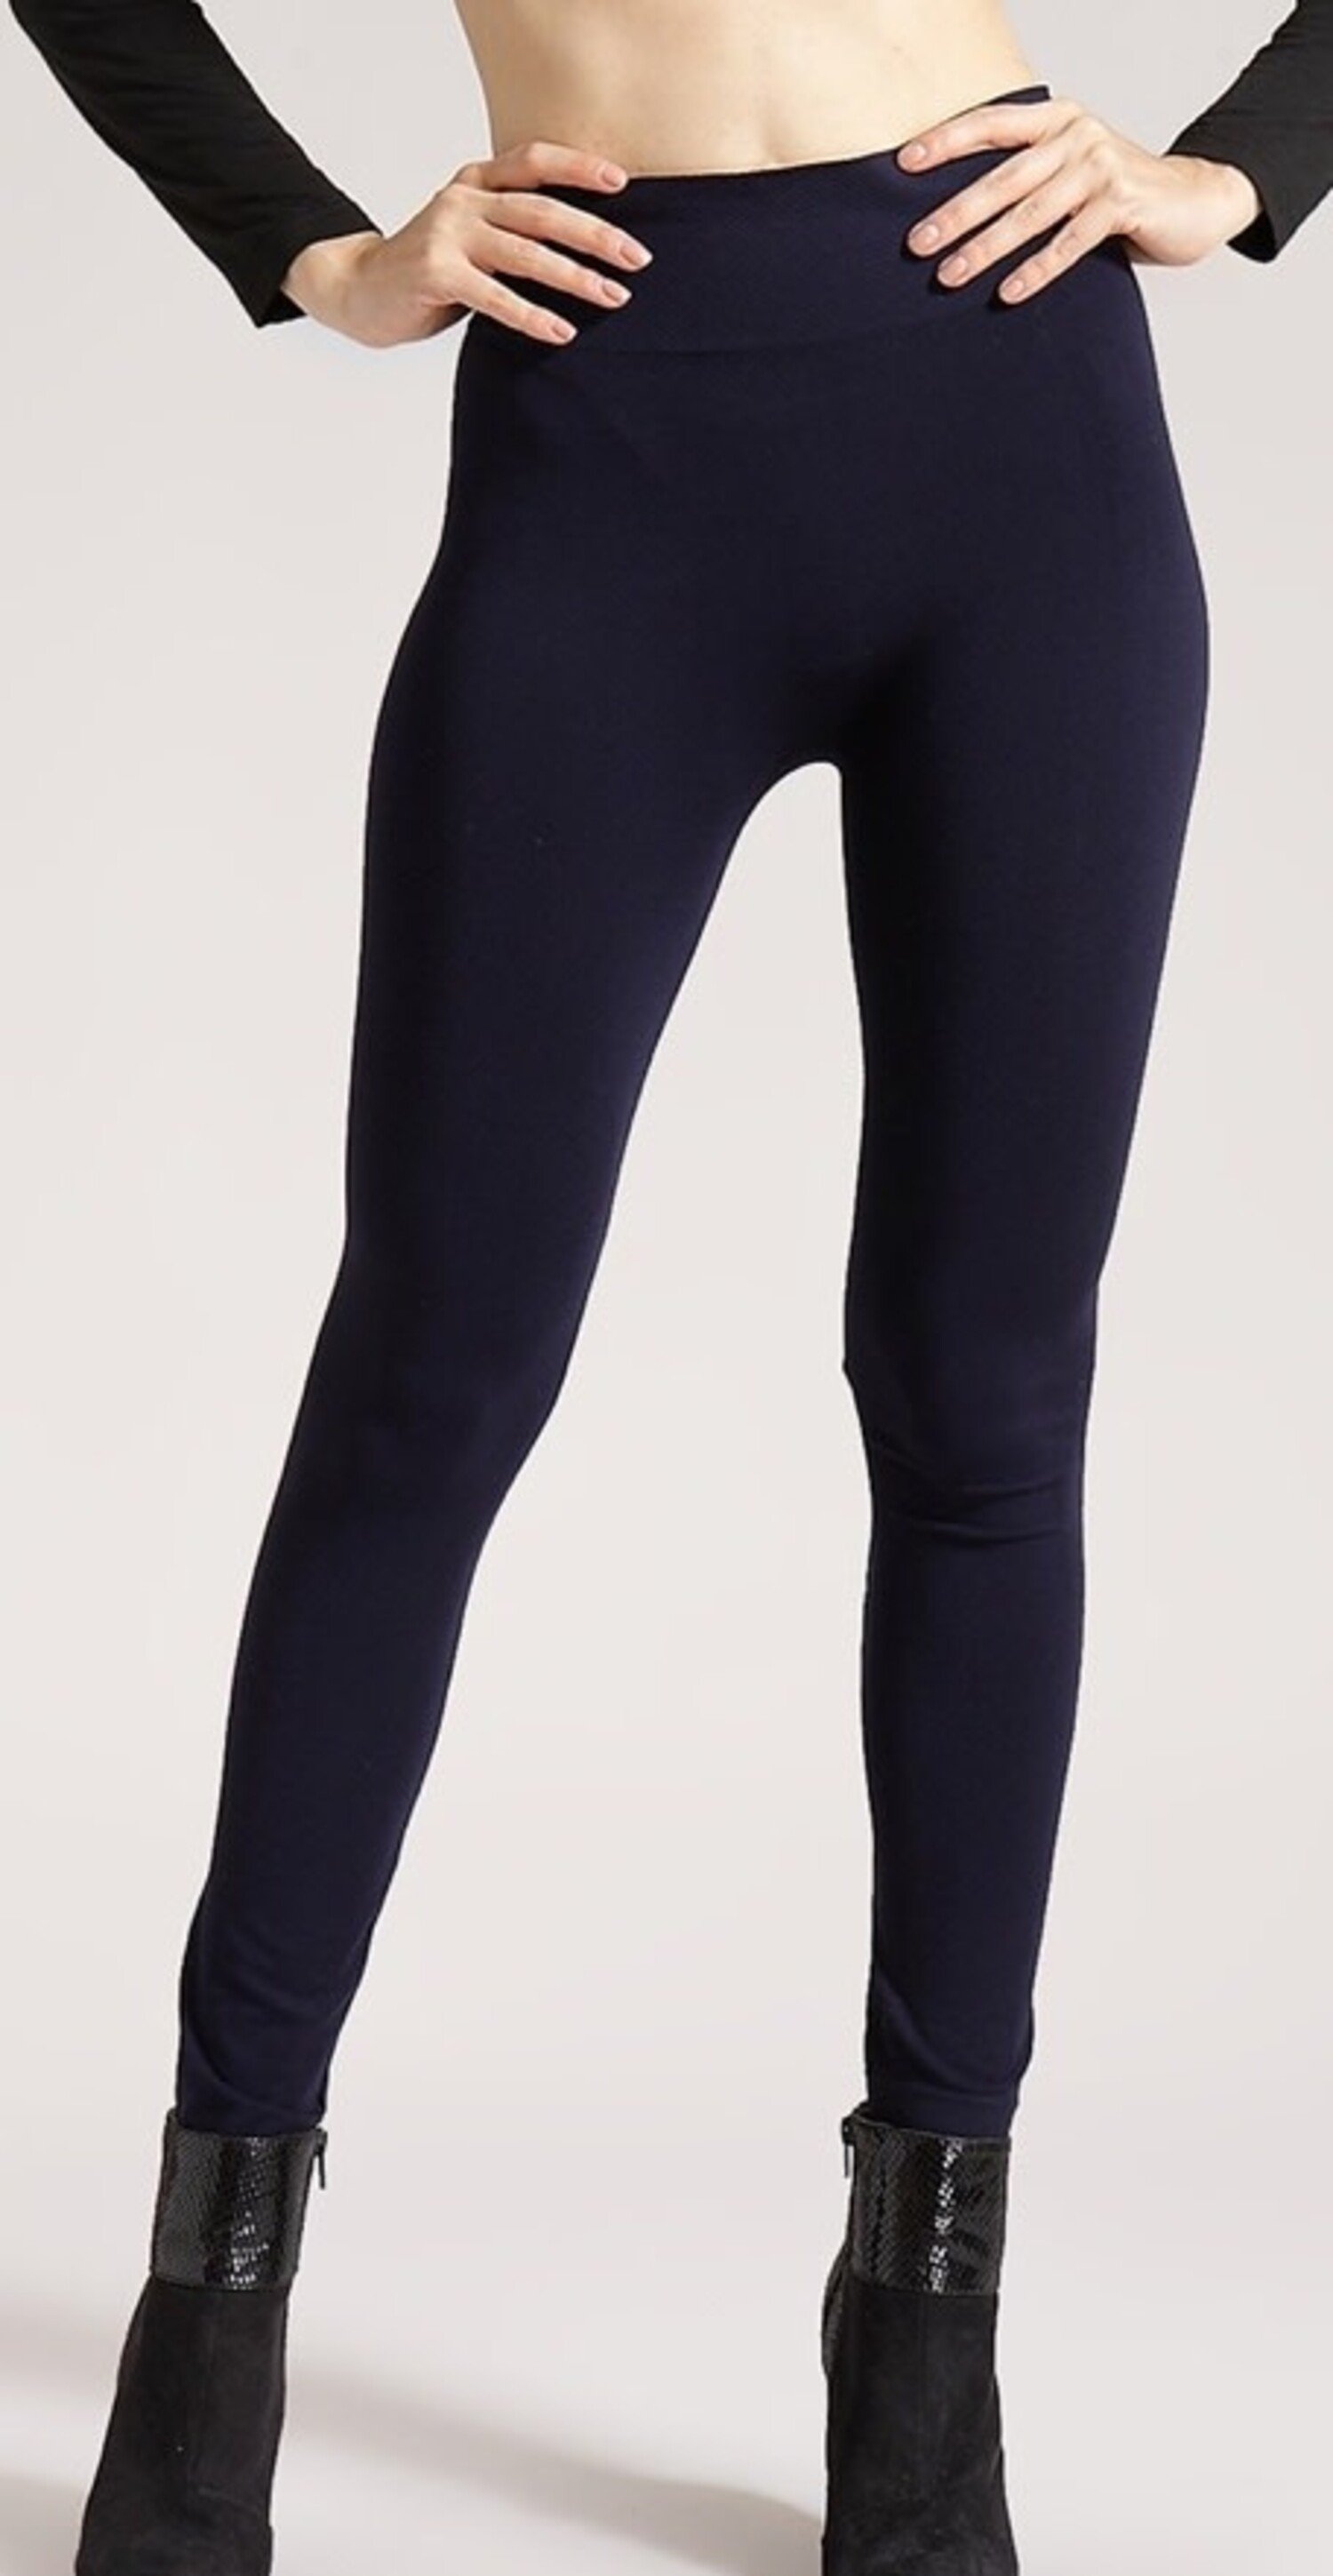 Seamless Legging Phone Pocket Pants in Black by BambooYou